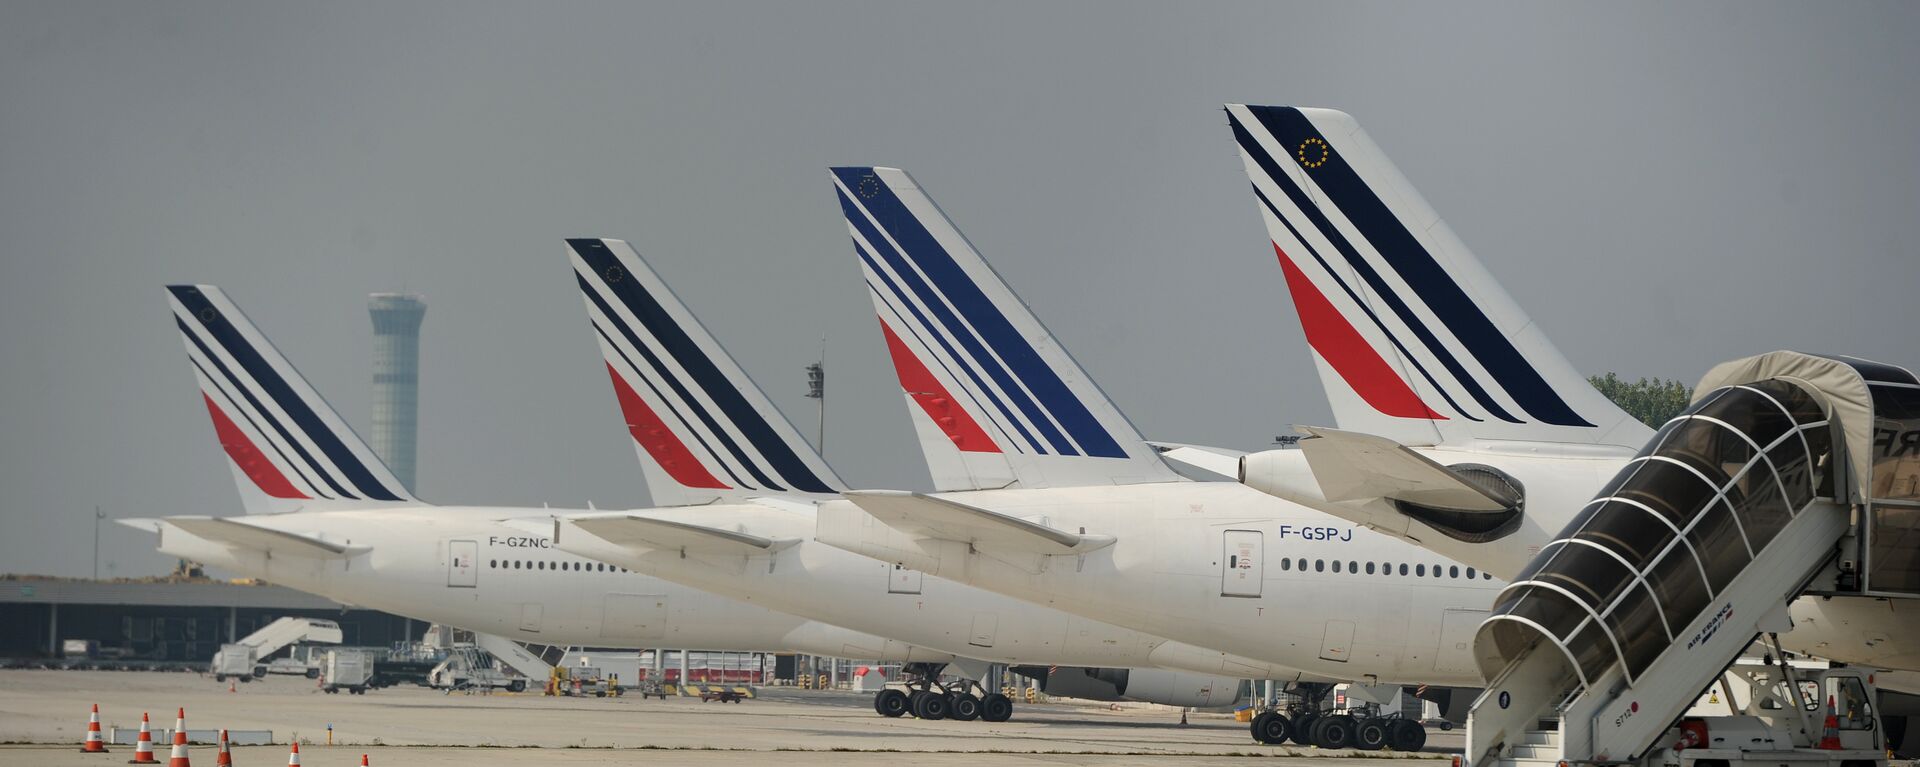 Air France planes are parked on the tarmac of Charles de Gaulle airport on September 24, 2014 in Roissy during an Air France pilots strike - Sputnik International, 1920, 03.02.2021